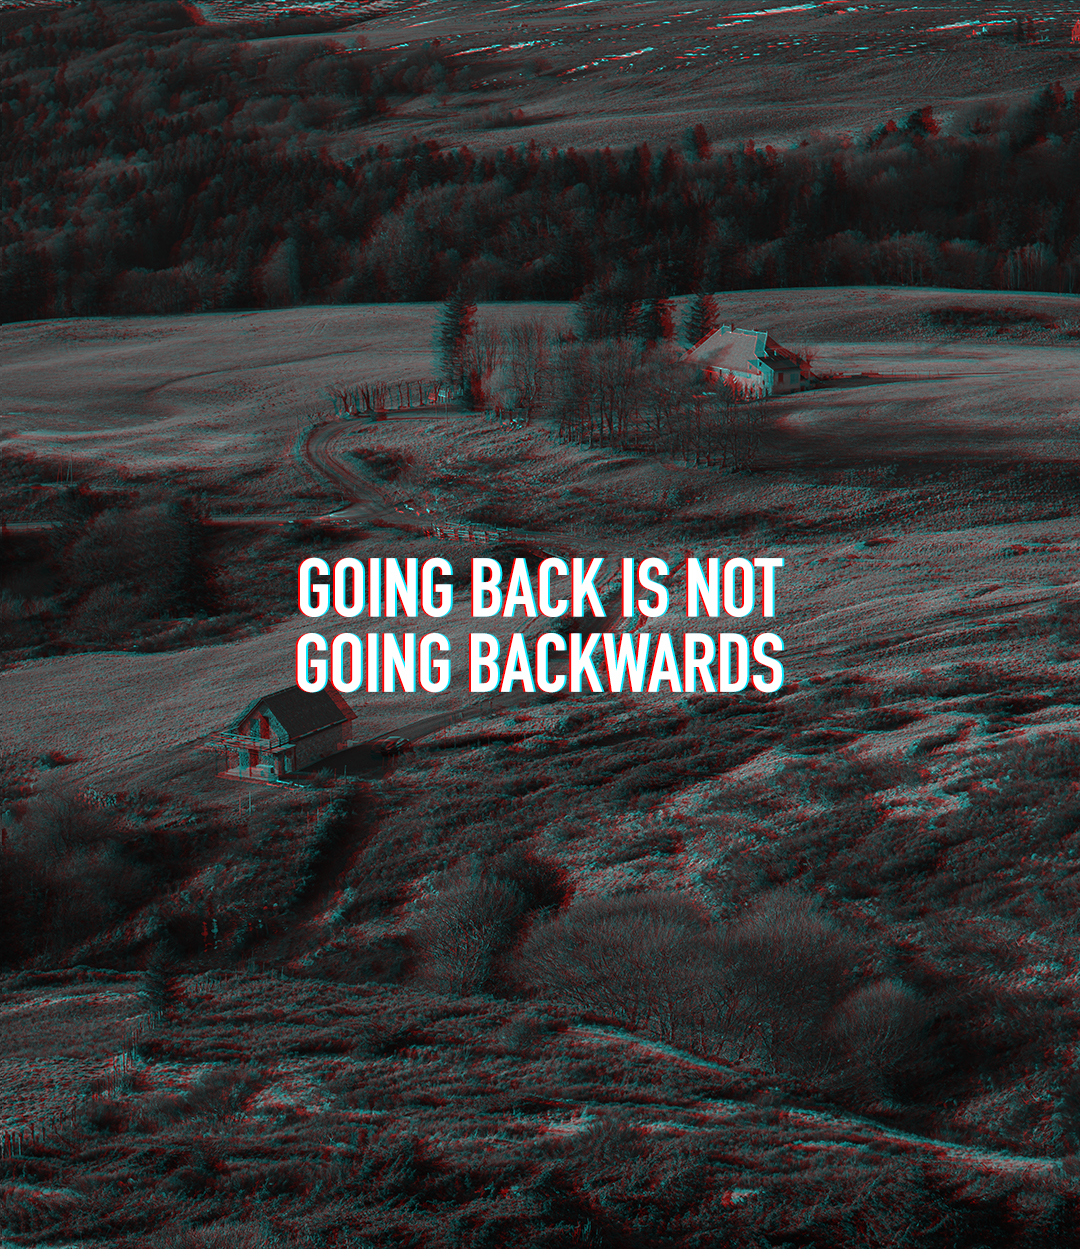 Going Back is not Going Backwards